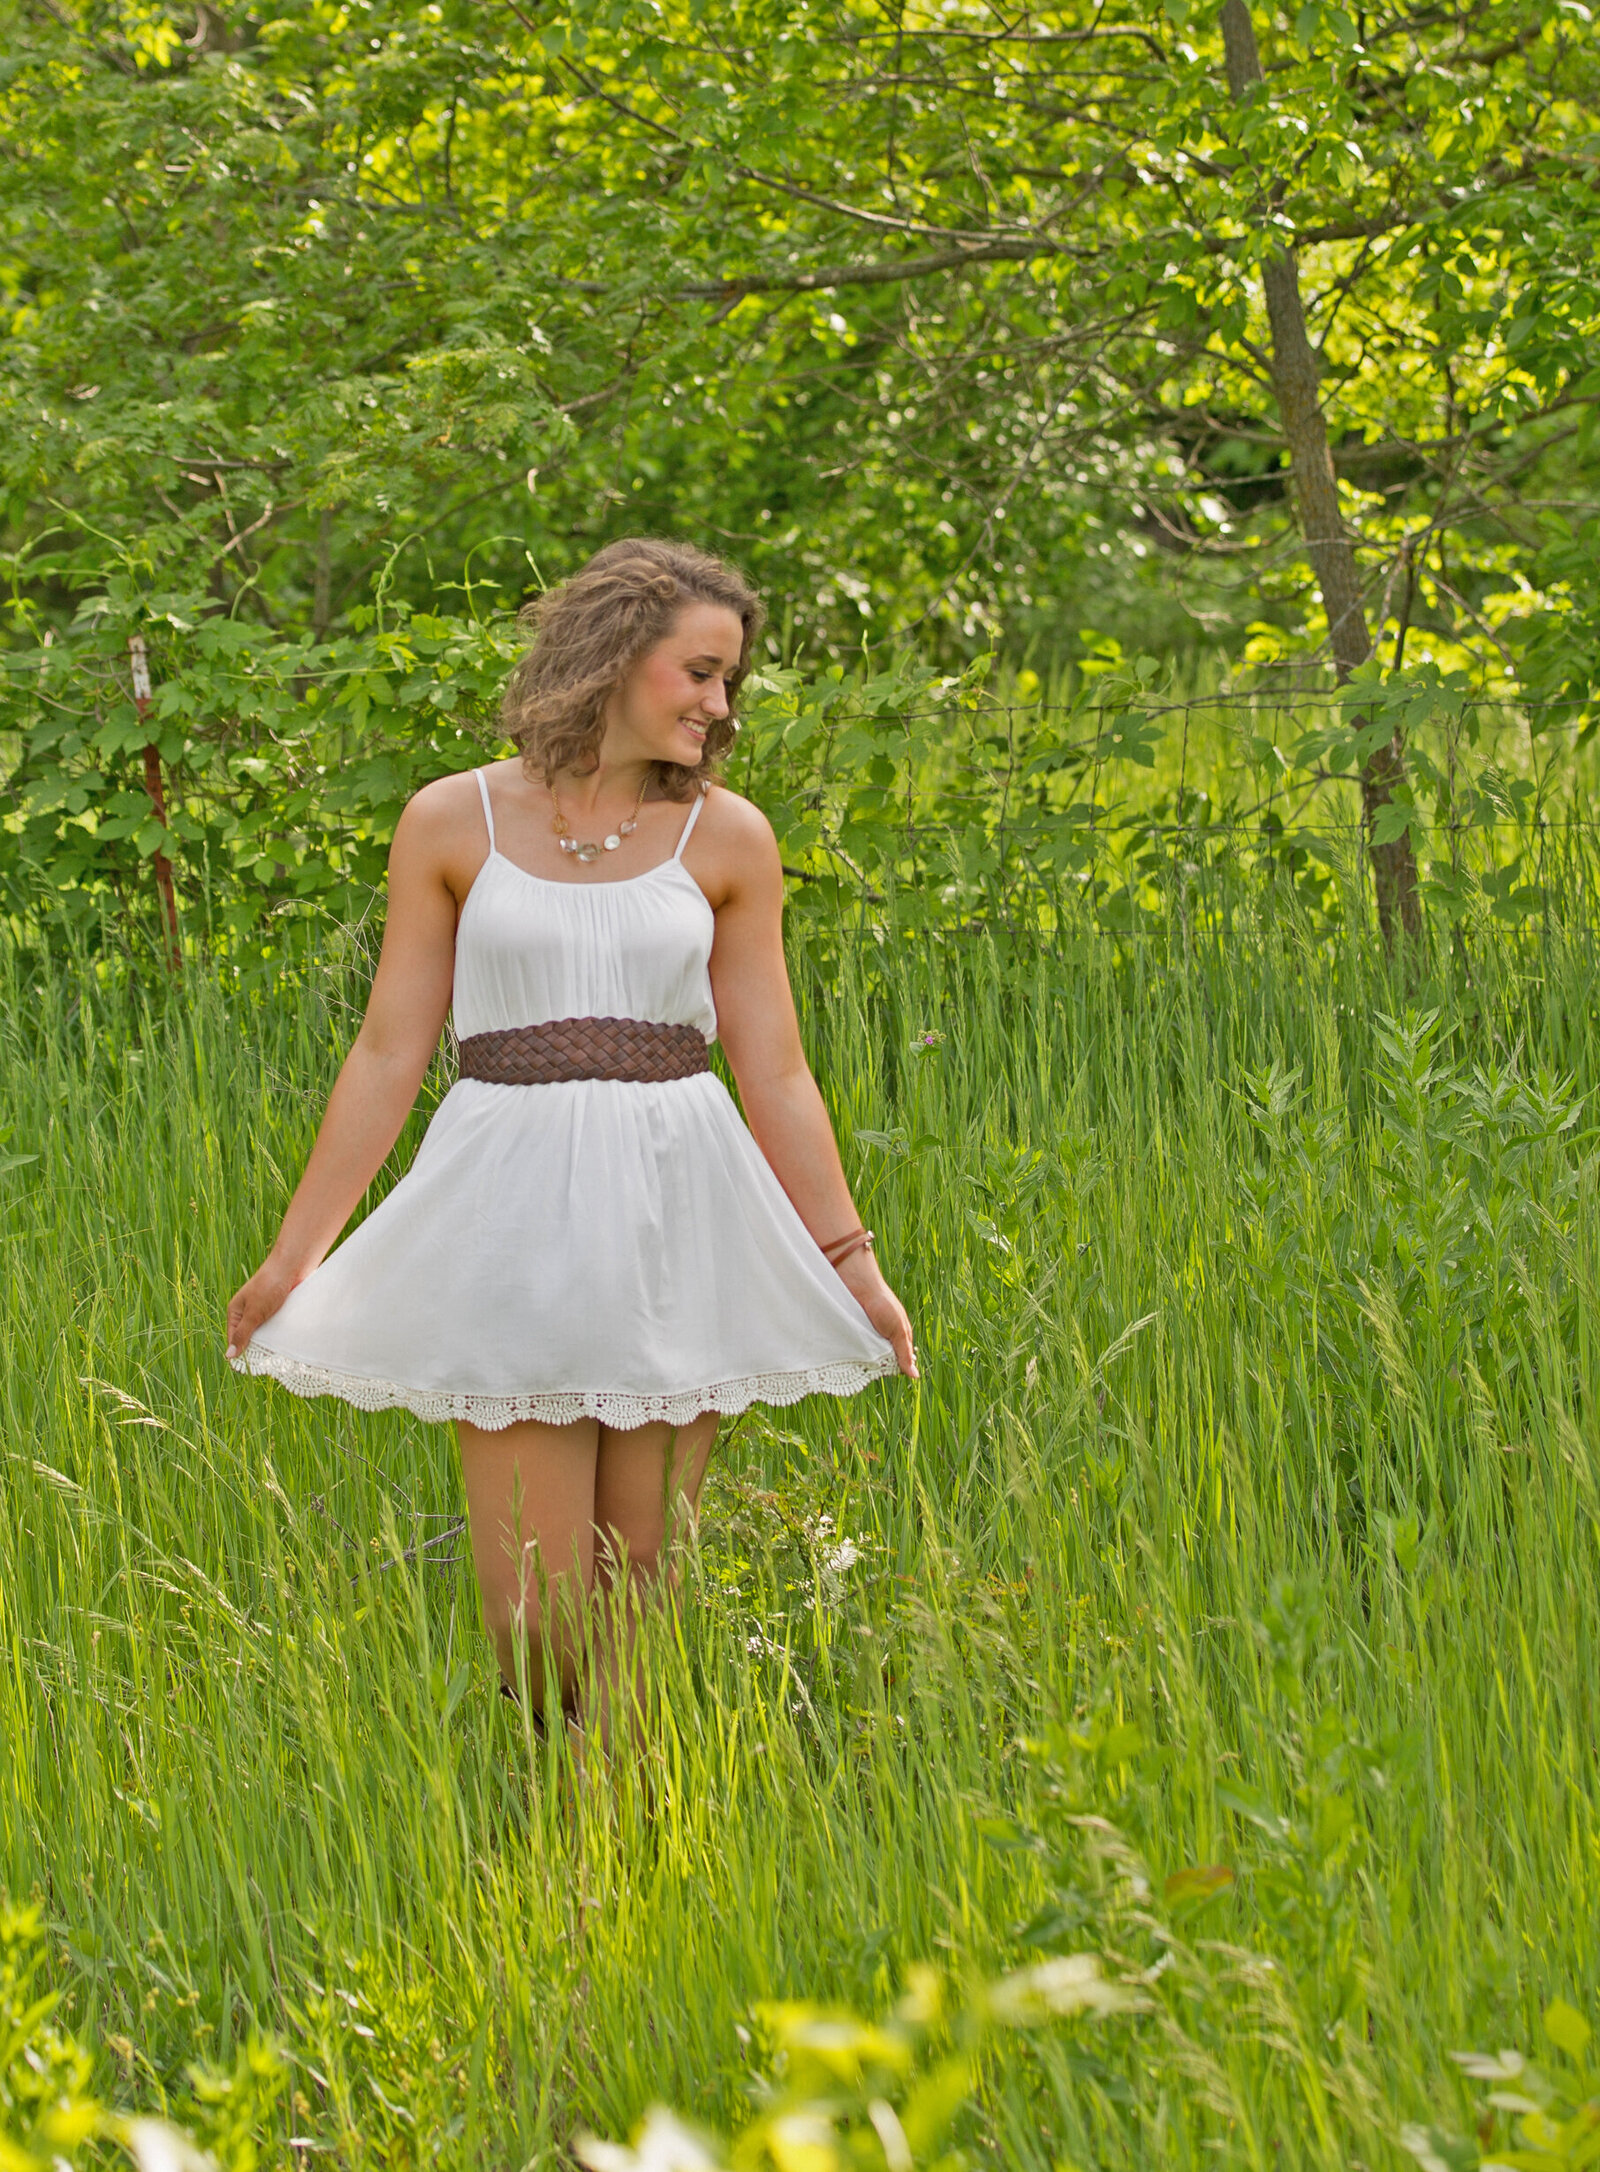 Payten poses a white dress  in a green field